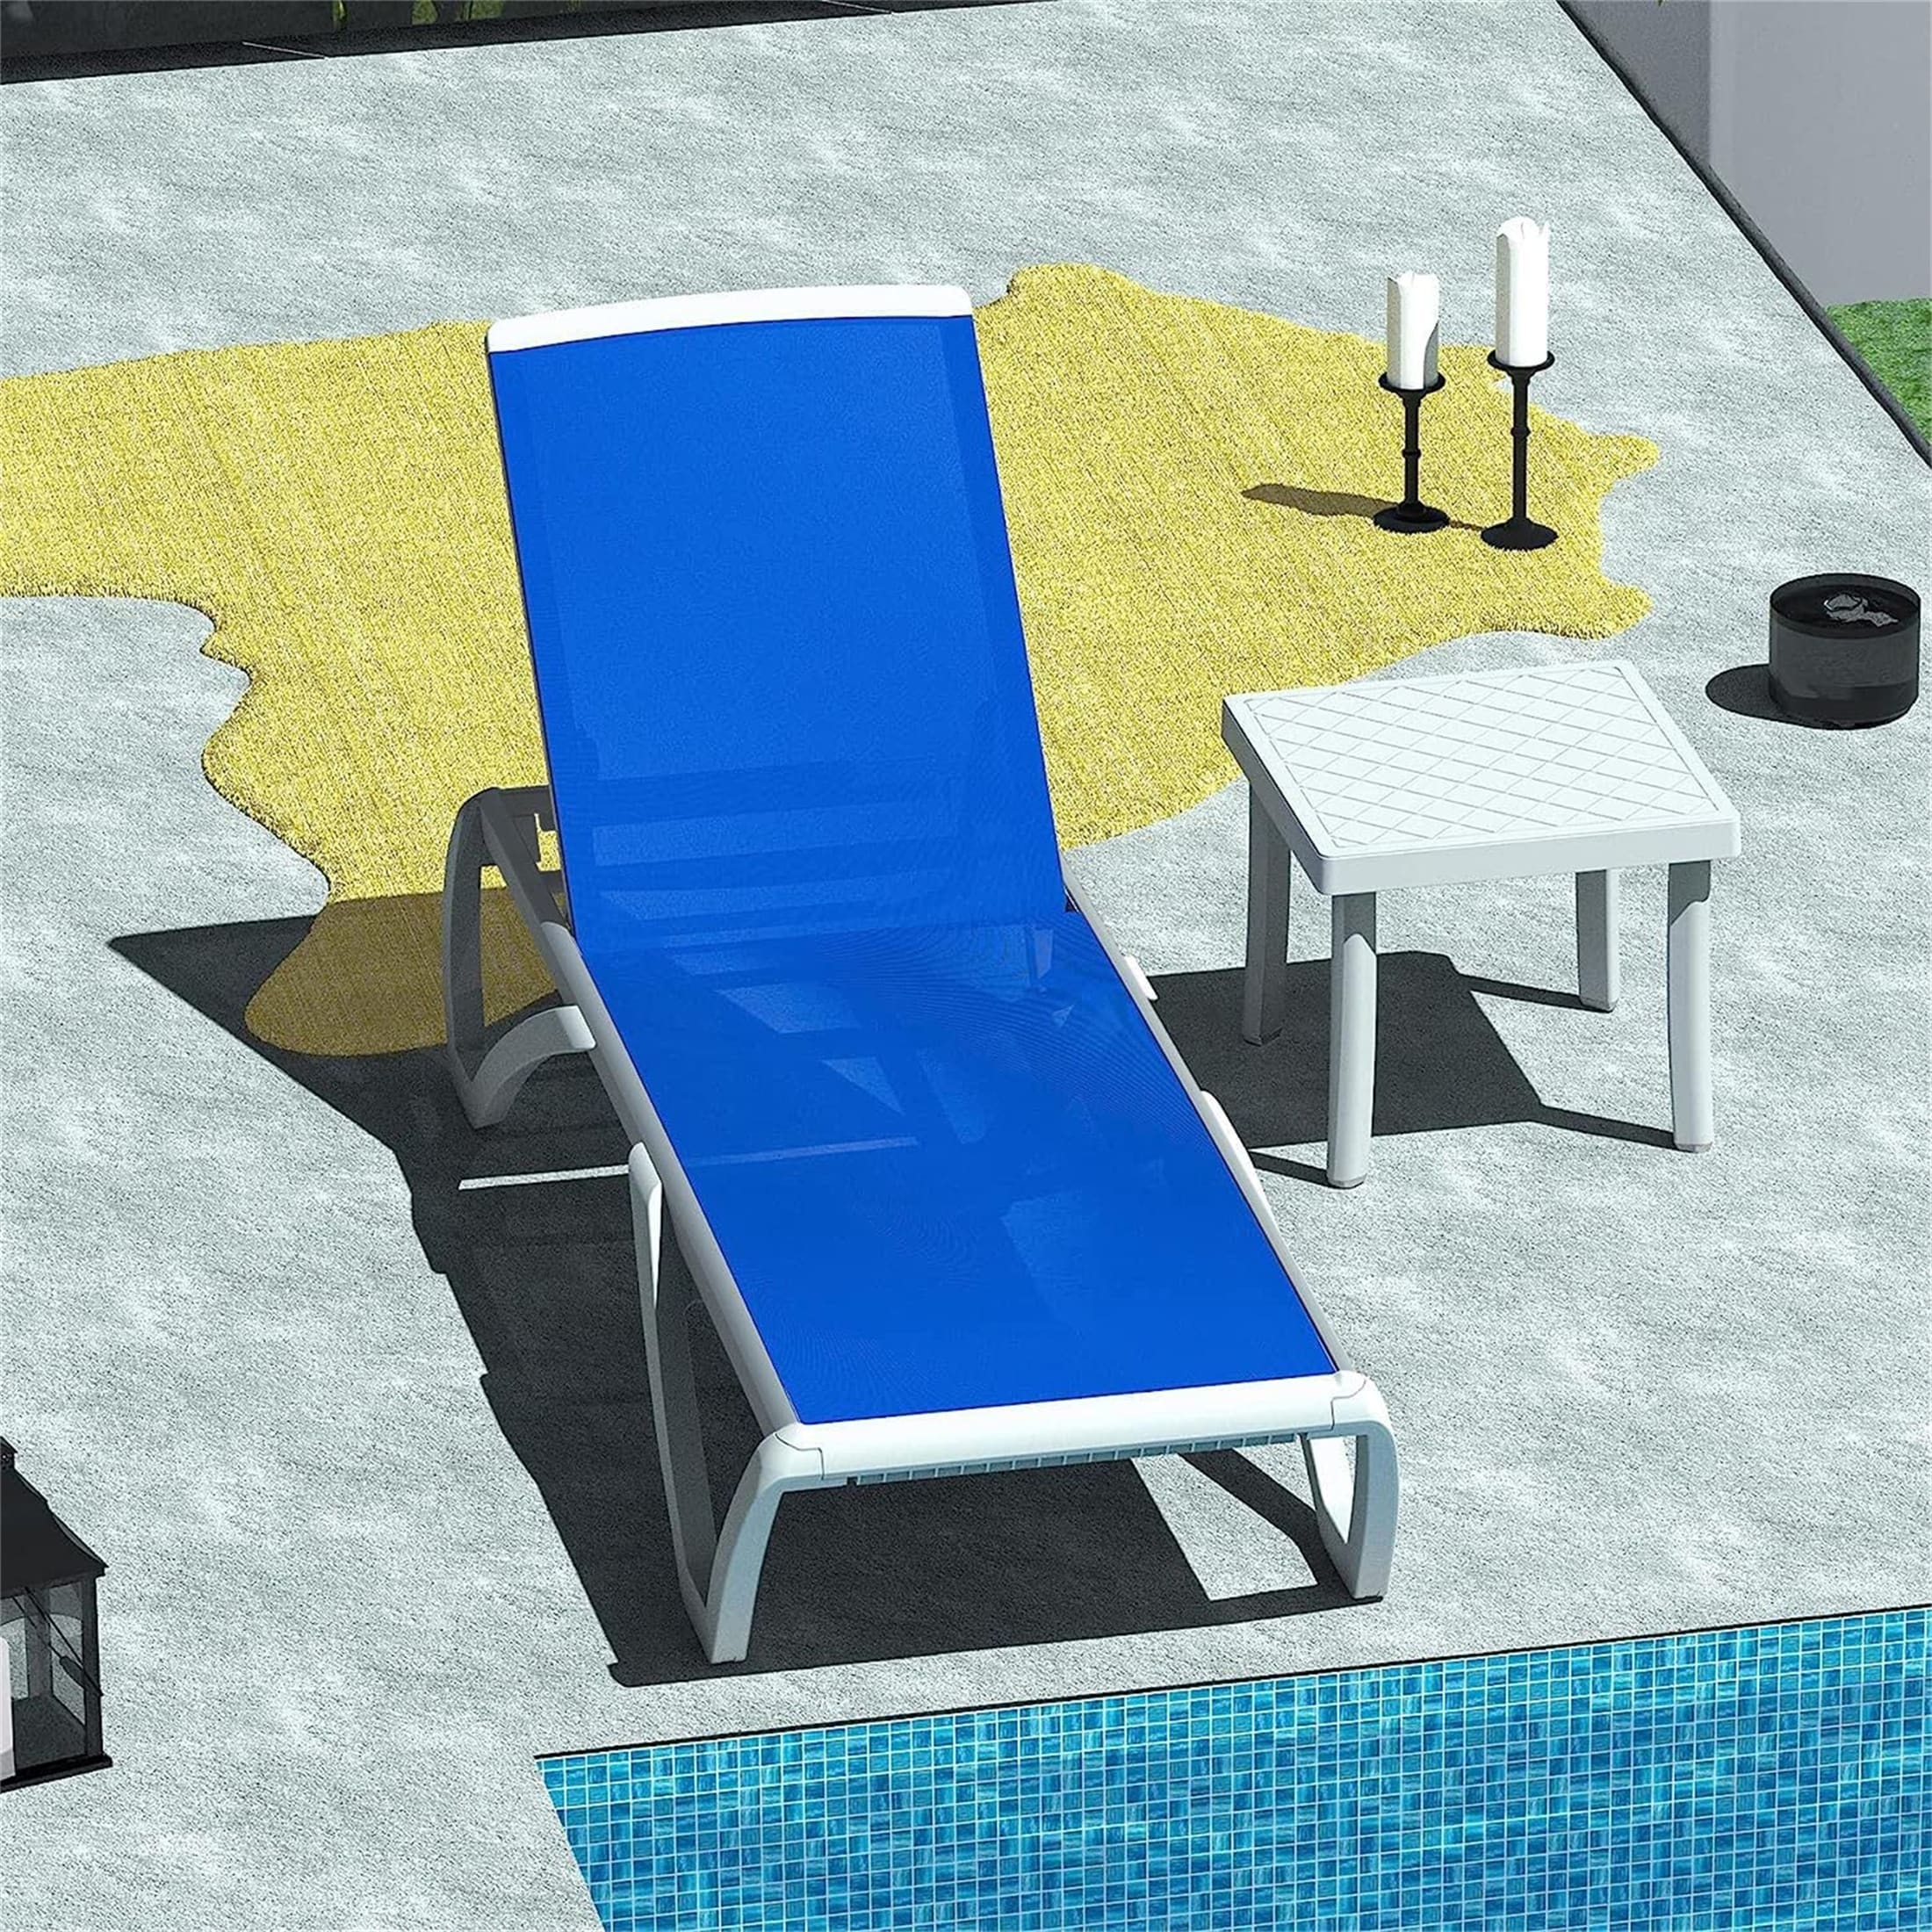 Patio Chaise Lounge Adjustable Aluminum Pool Lounge Chairs